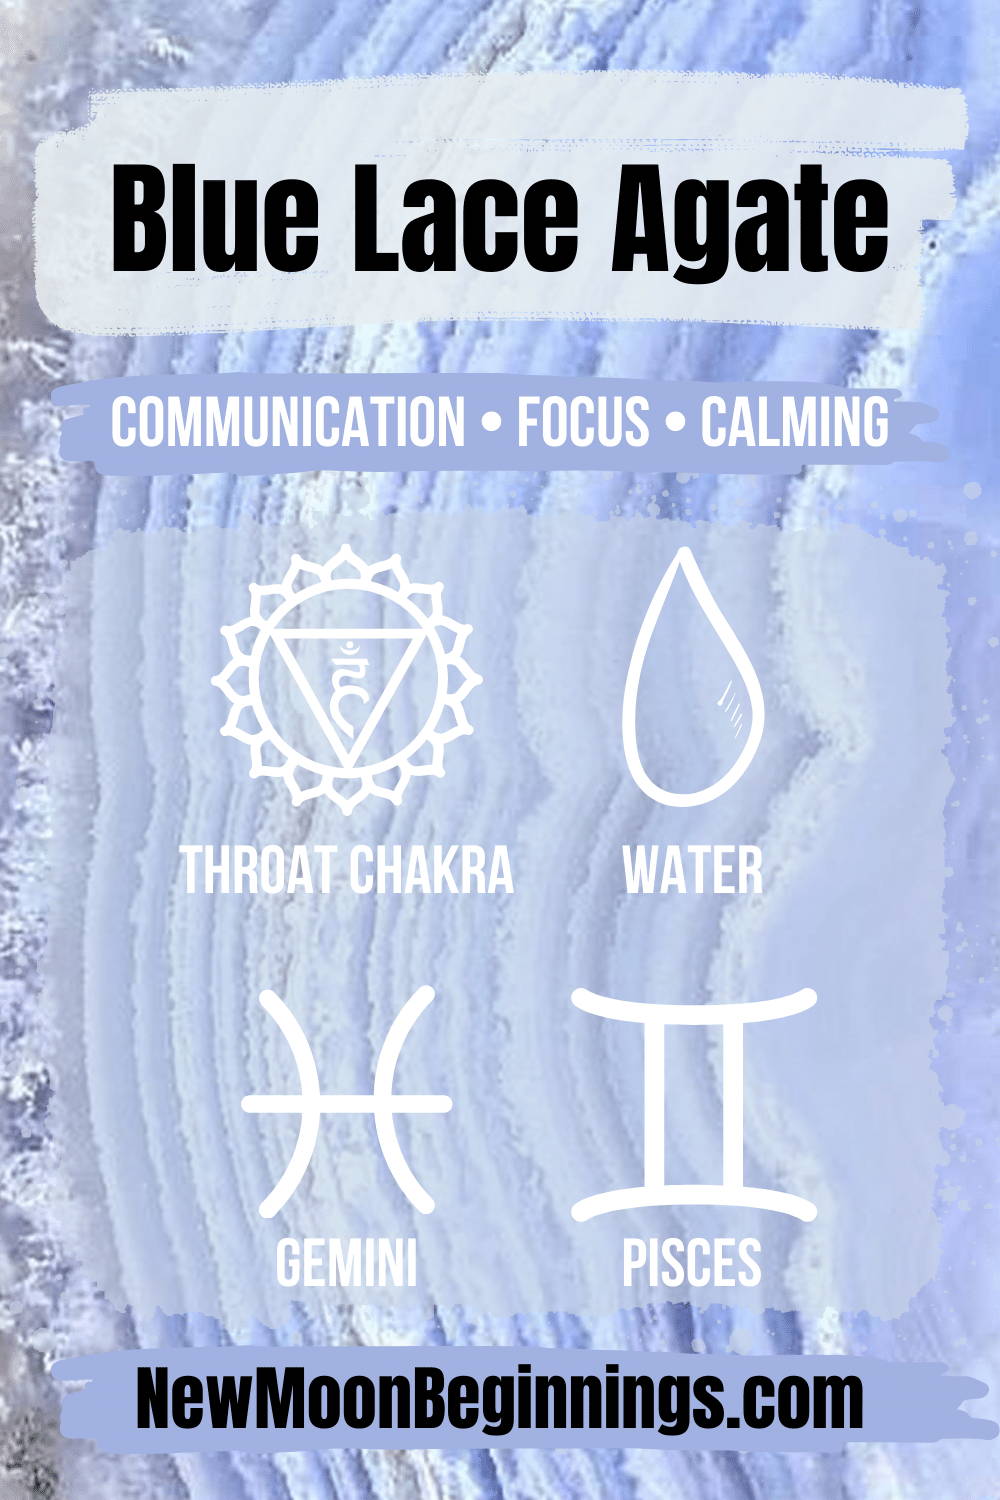 Blue Lace Agate Meaning & Properties: The [Complete] Guide